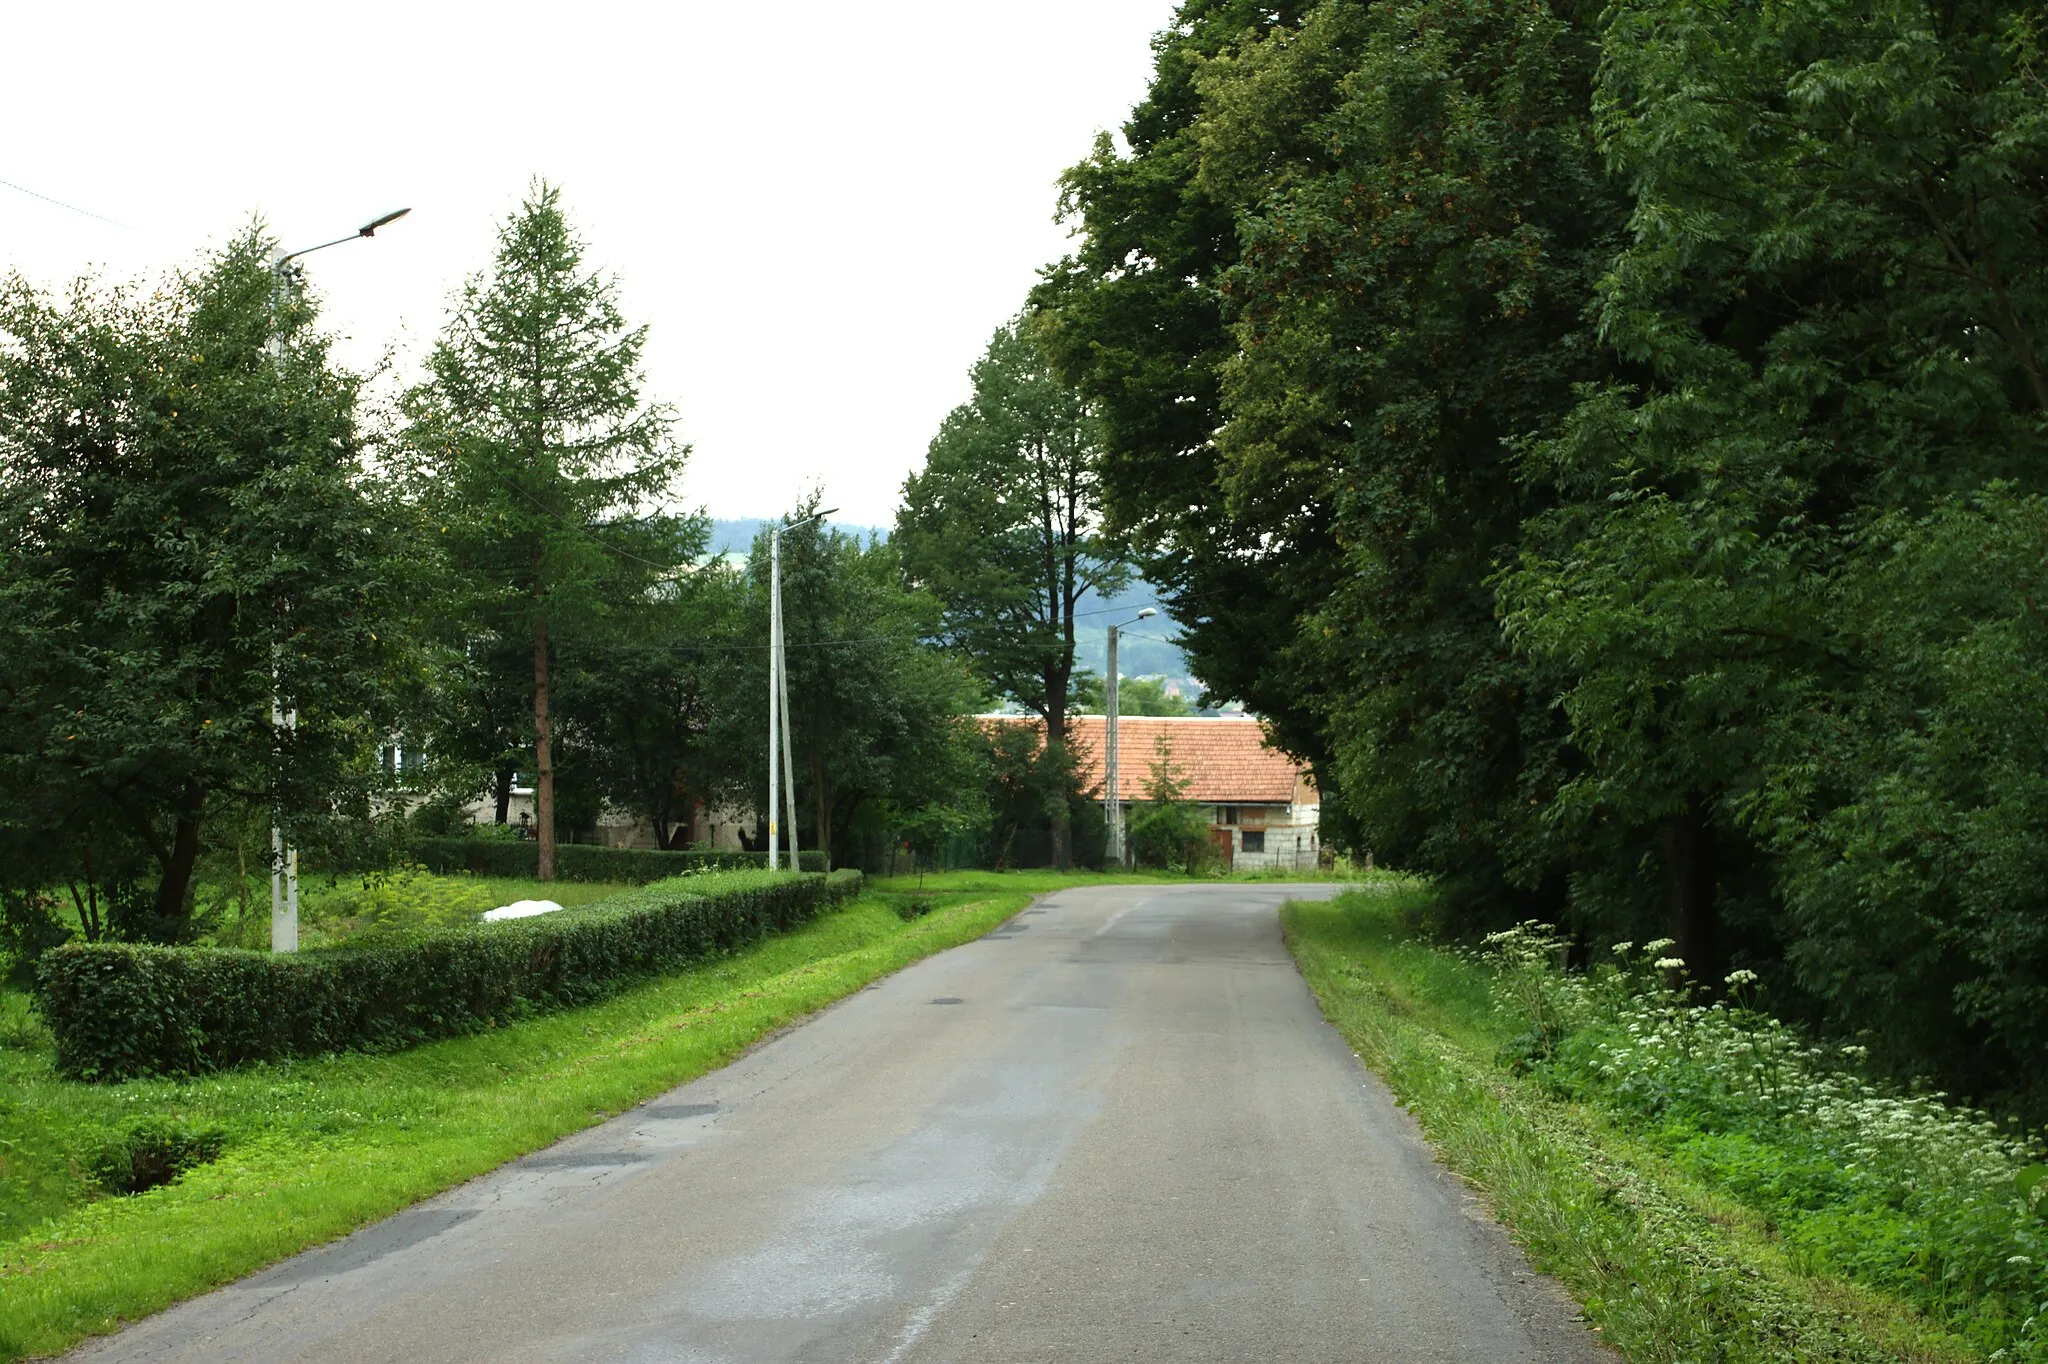 Photo showing: A road in the Wzdów village, Podkarpackie voivodeship, Poland